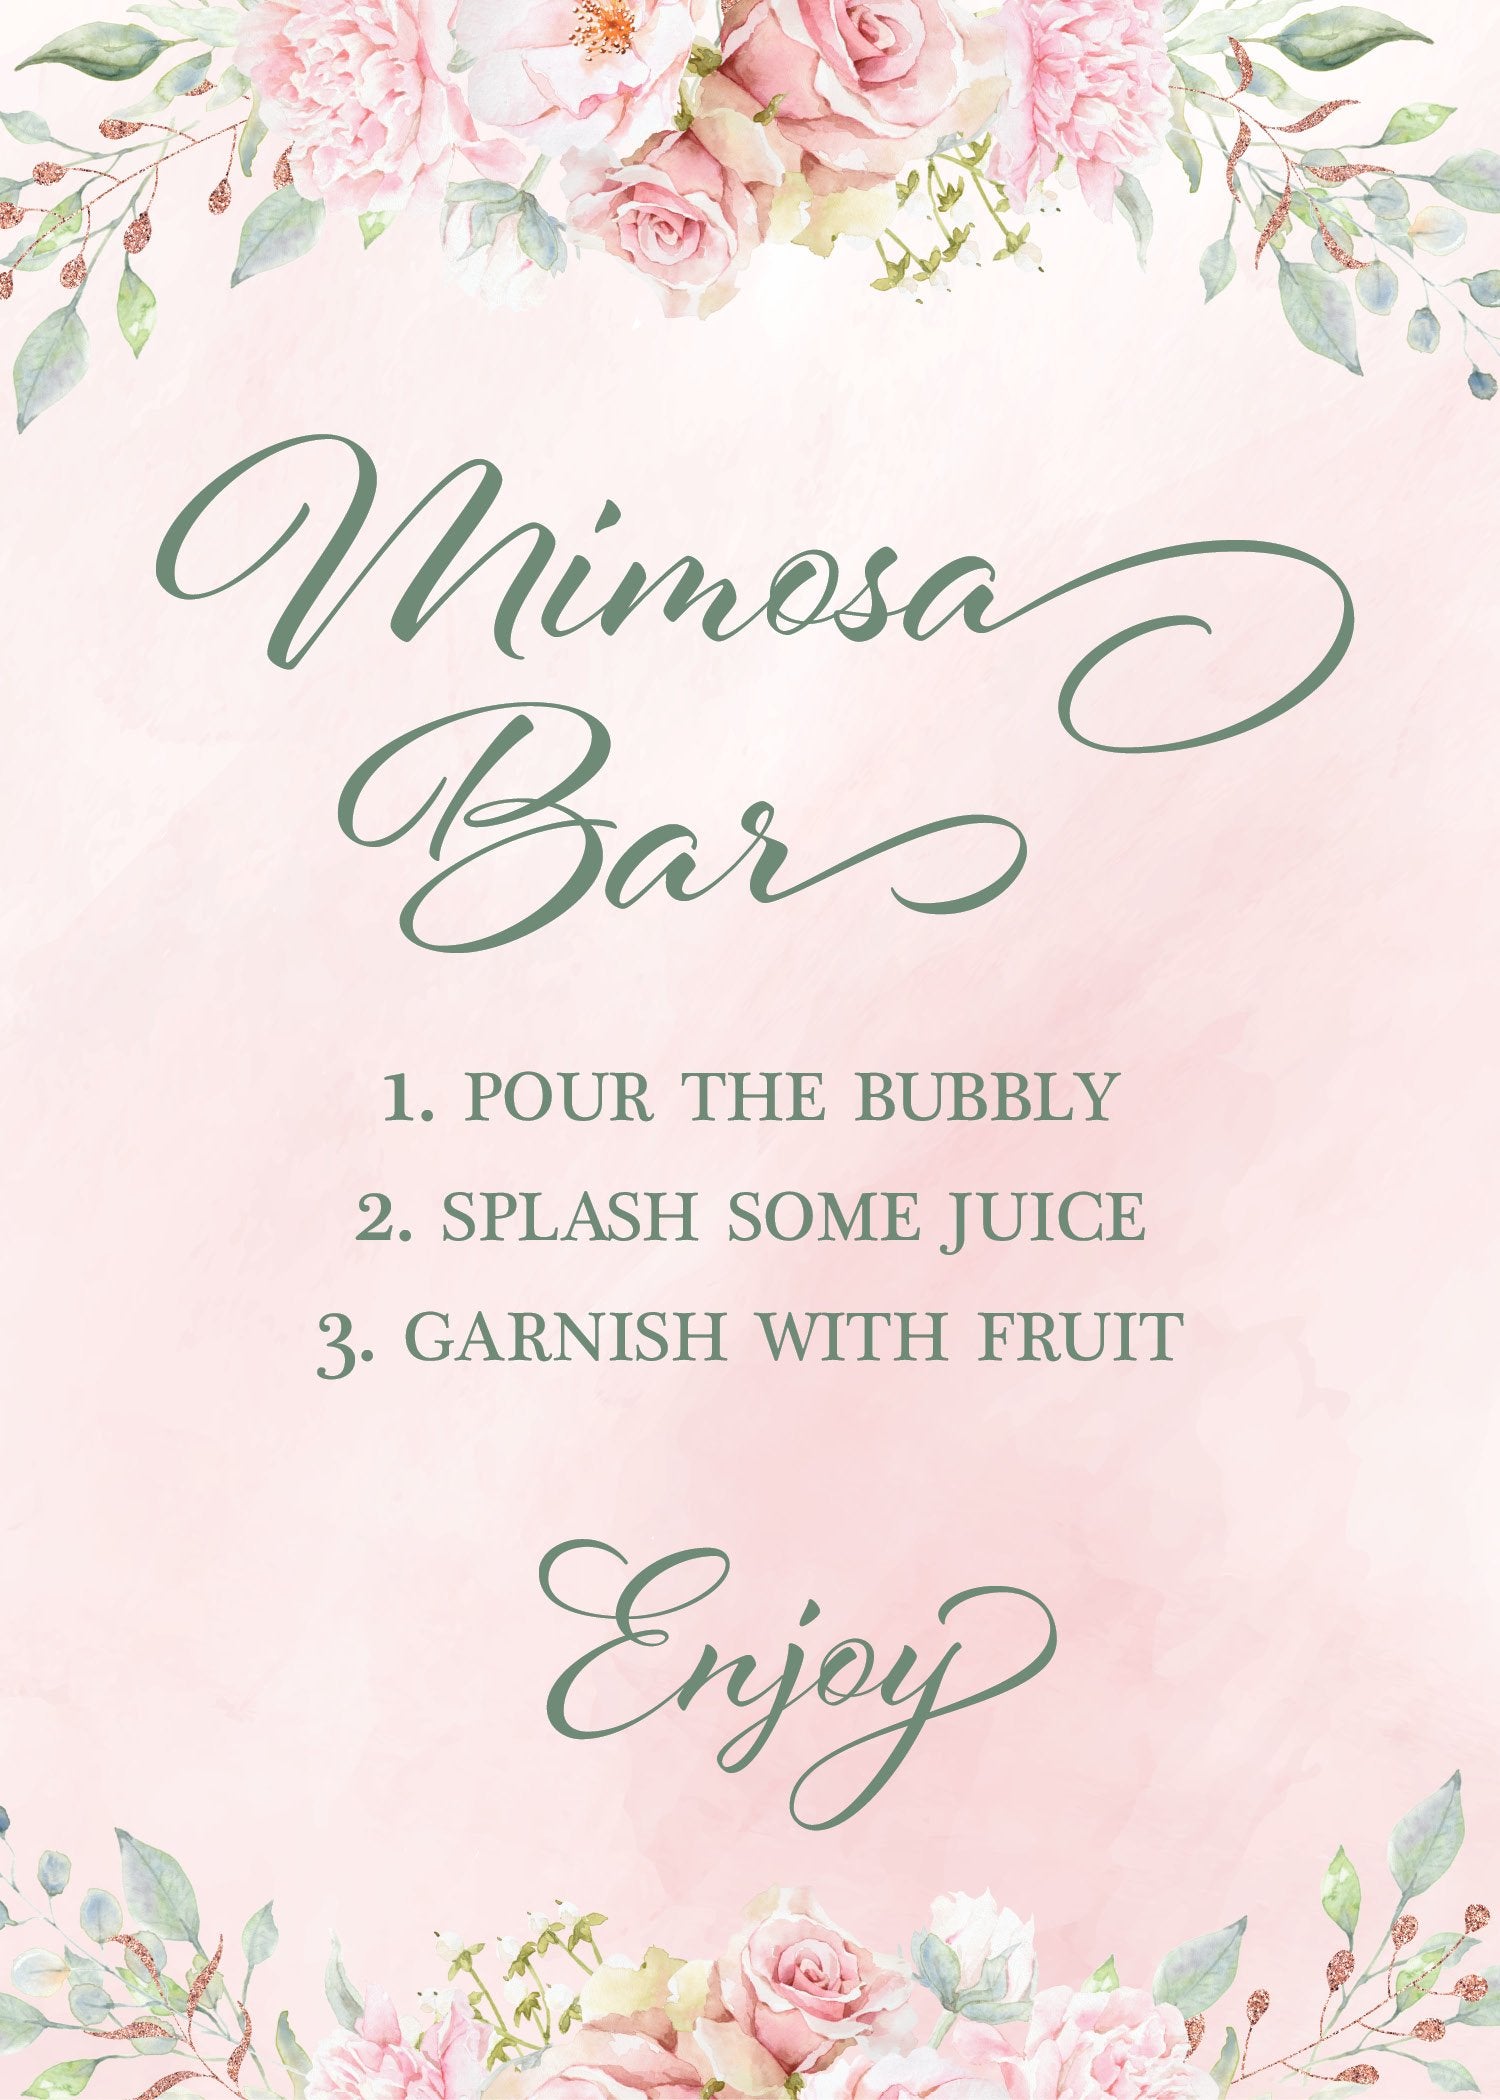 Mimosa bar made for a special bride only by #MauiSpecialtyBars